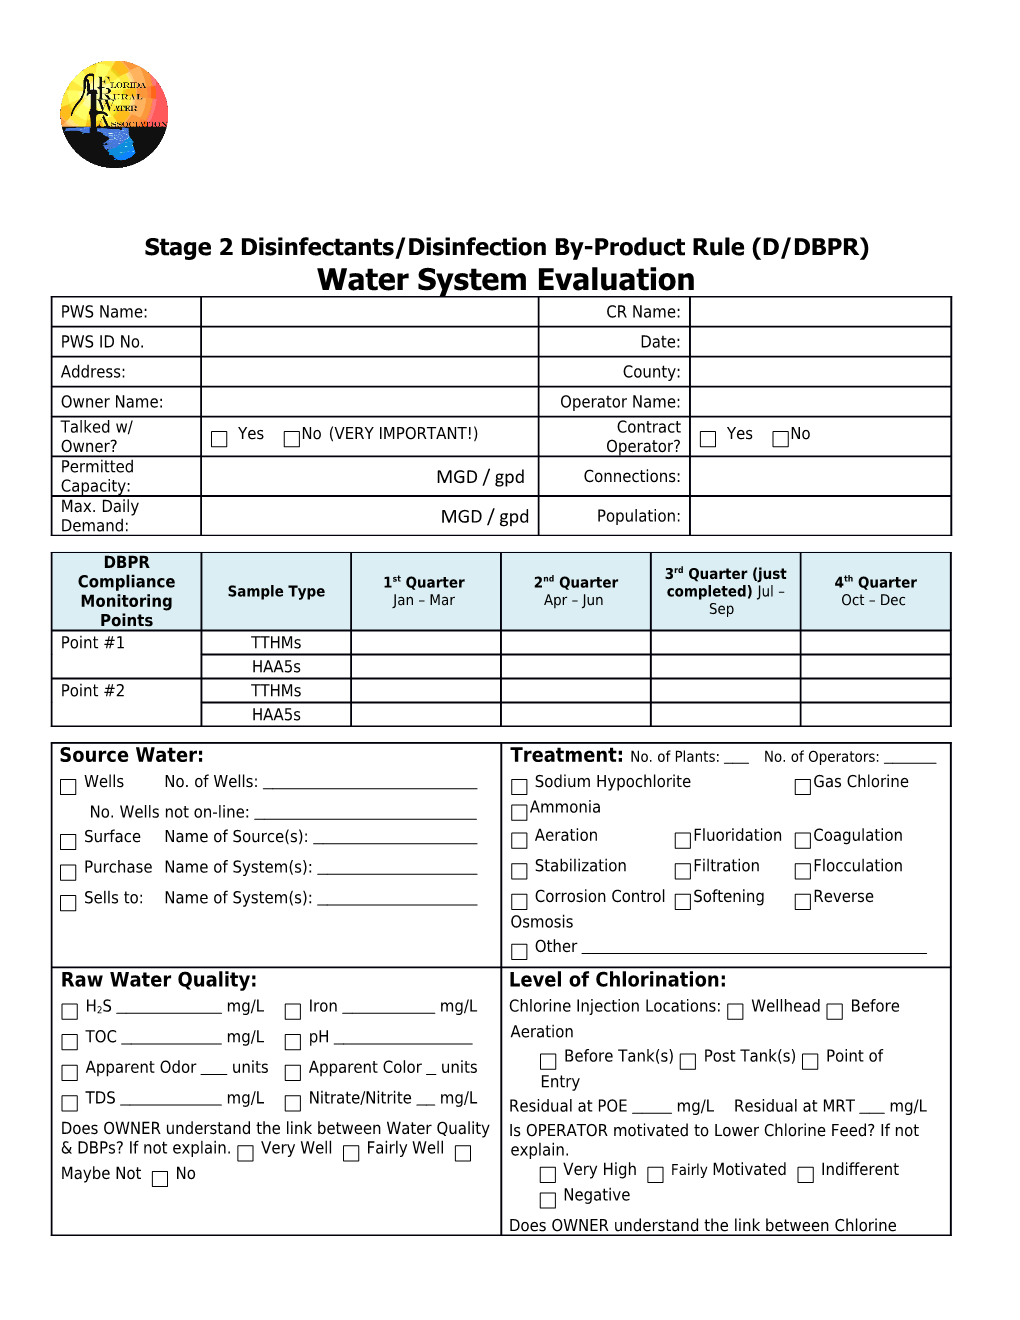 Stage 2 Disinfectants/Disinfection By-Product Rule (D/DBPR)